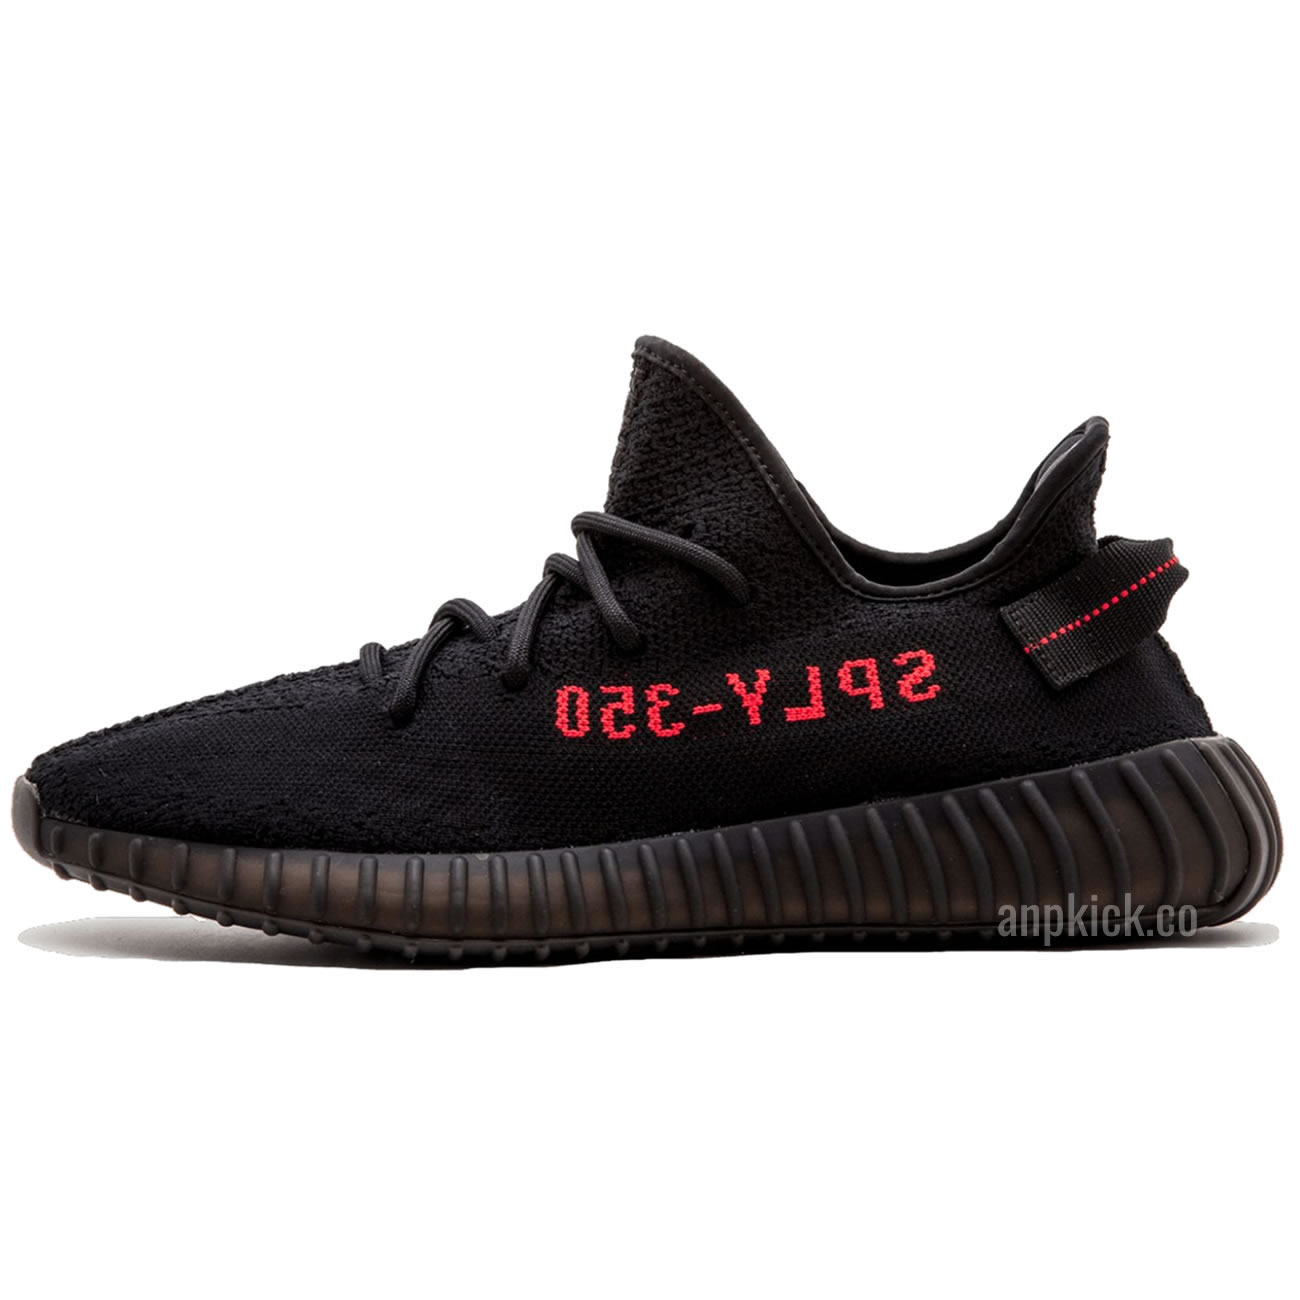 Yeezy Boost 350 V2 Bred Black Red 2020 New Release Cp9652 (1) - www.newkick.org